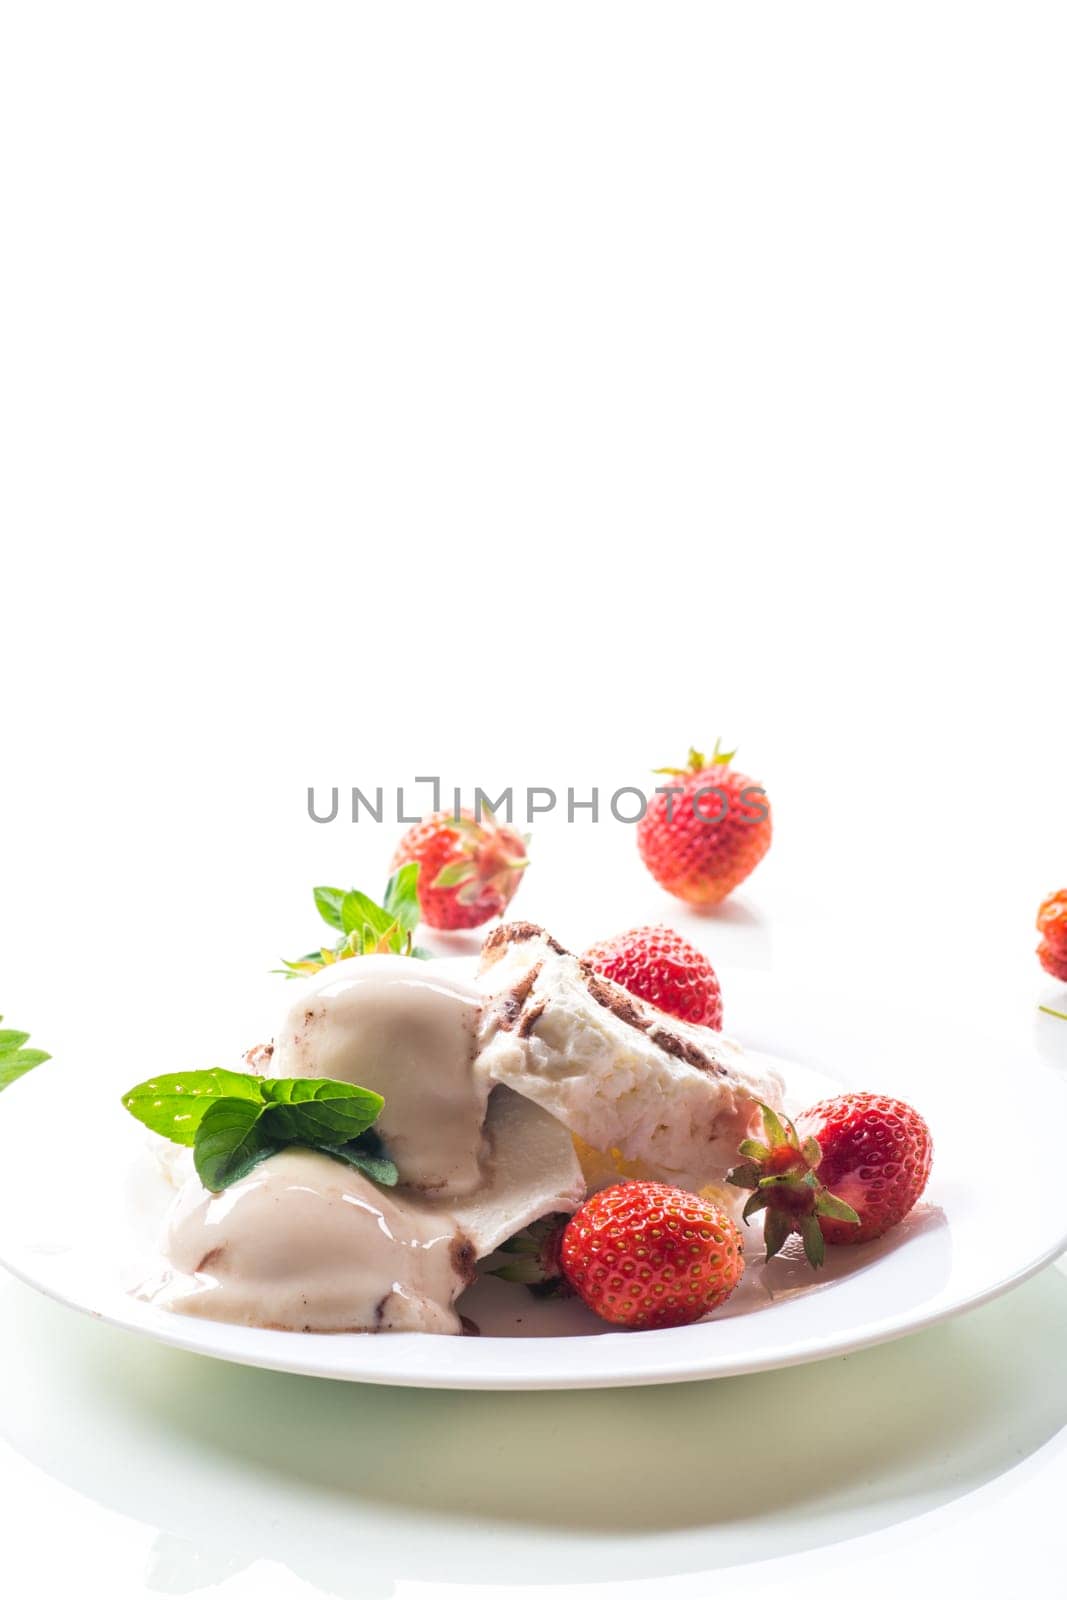 fresh organic cottage cheese with strawberries and ice cream in a plate by Rawlik